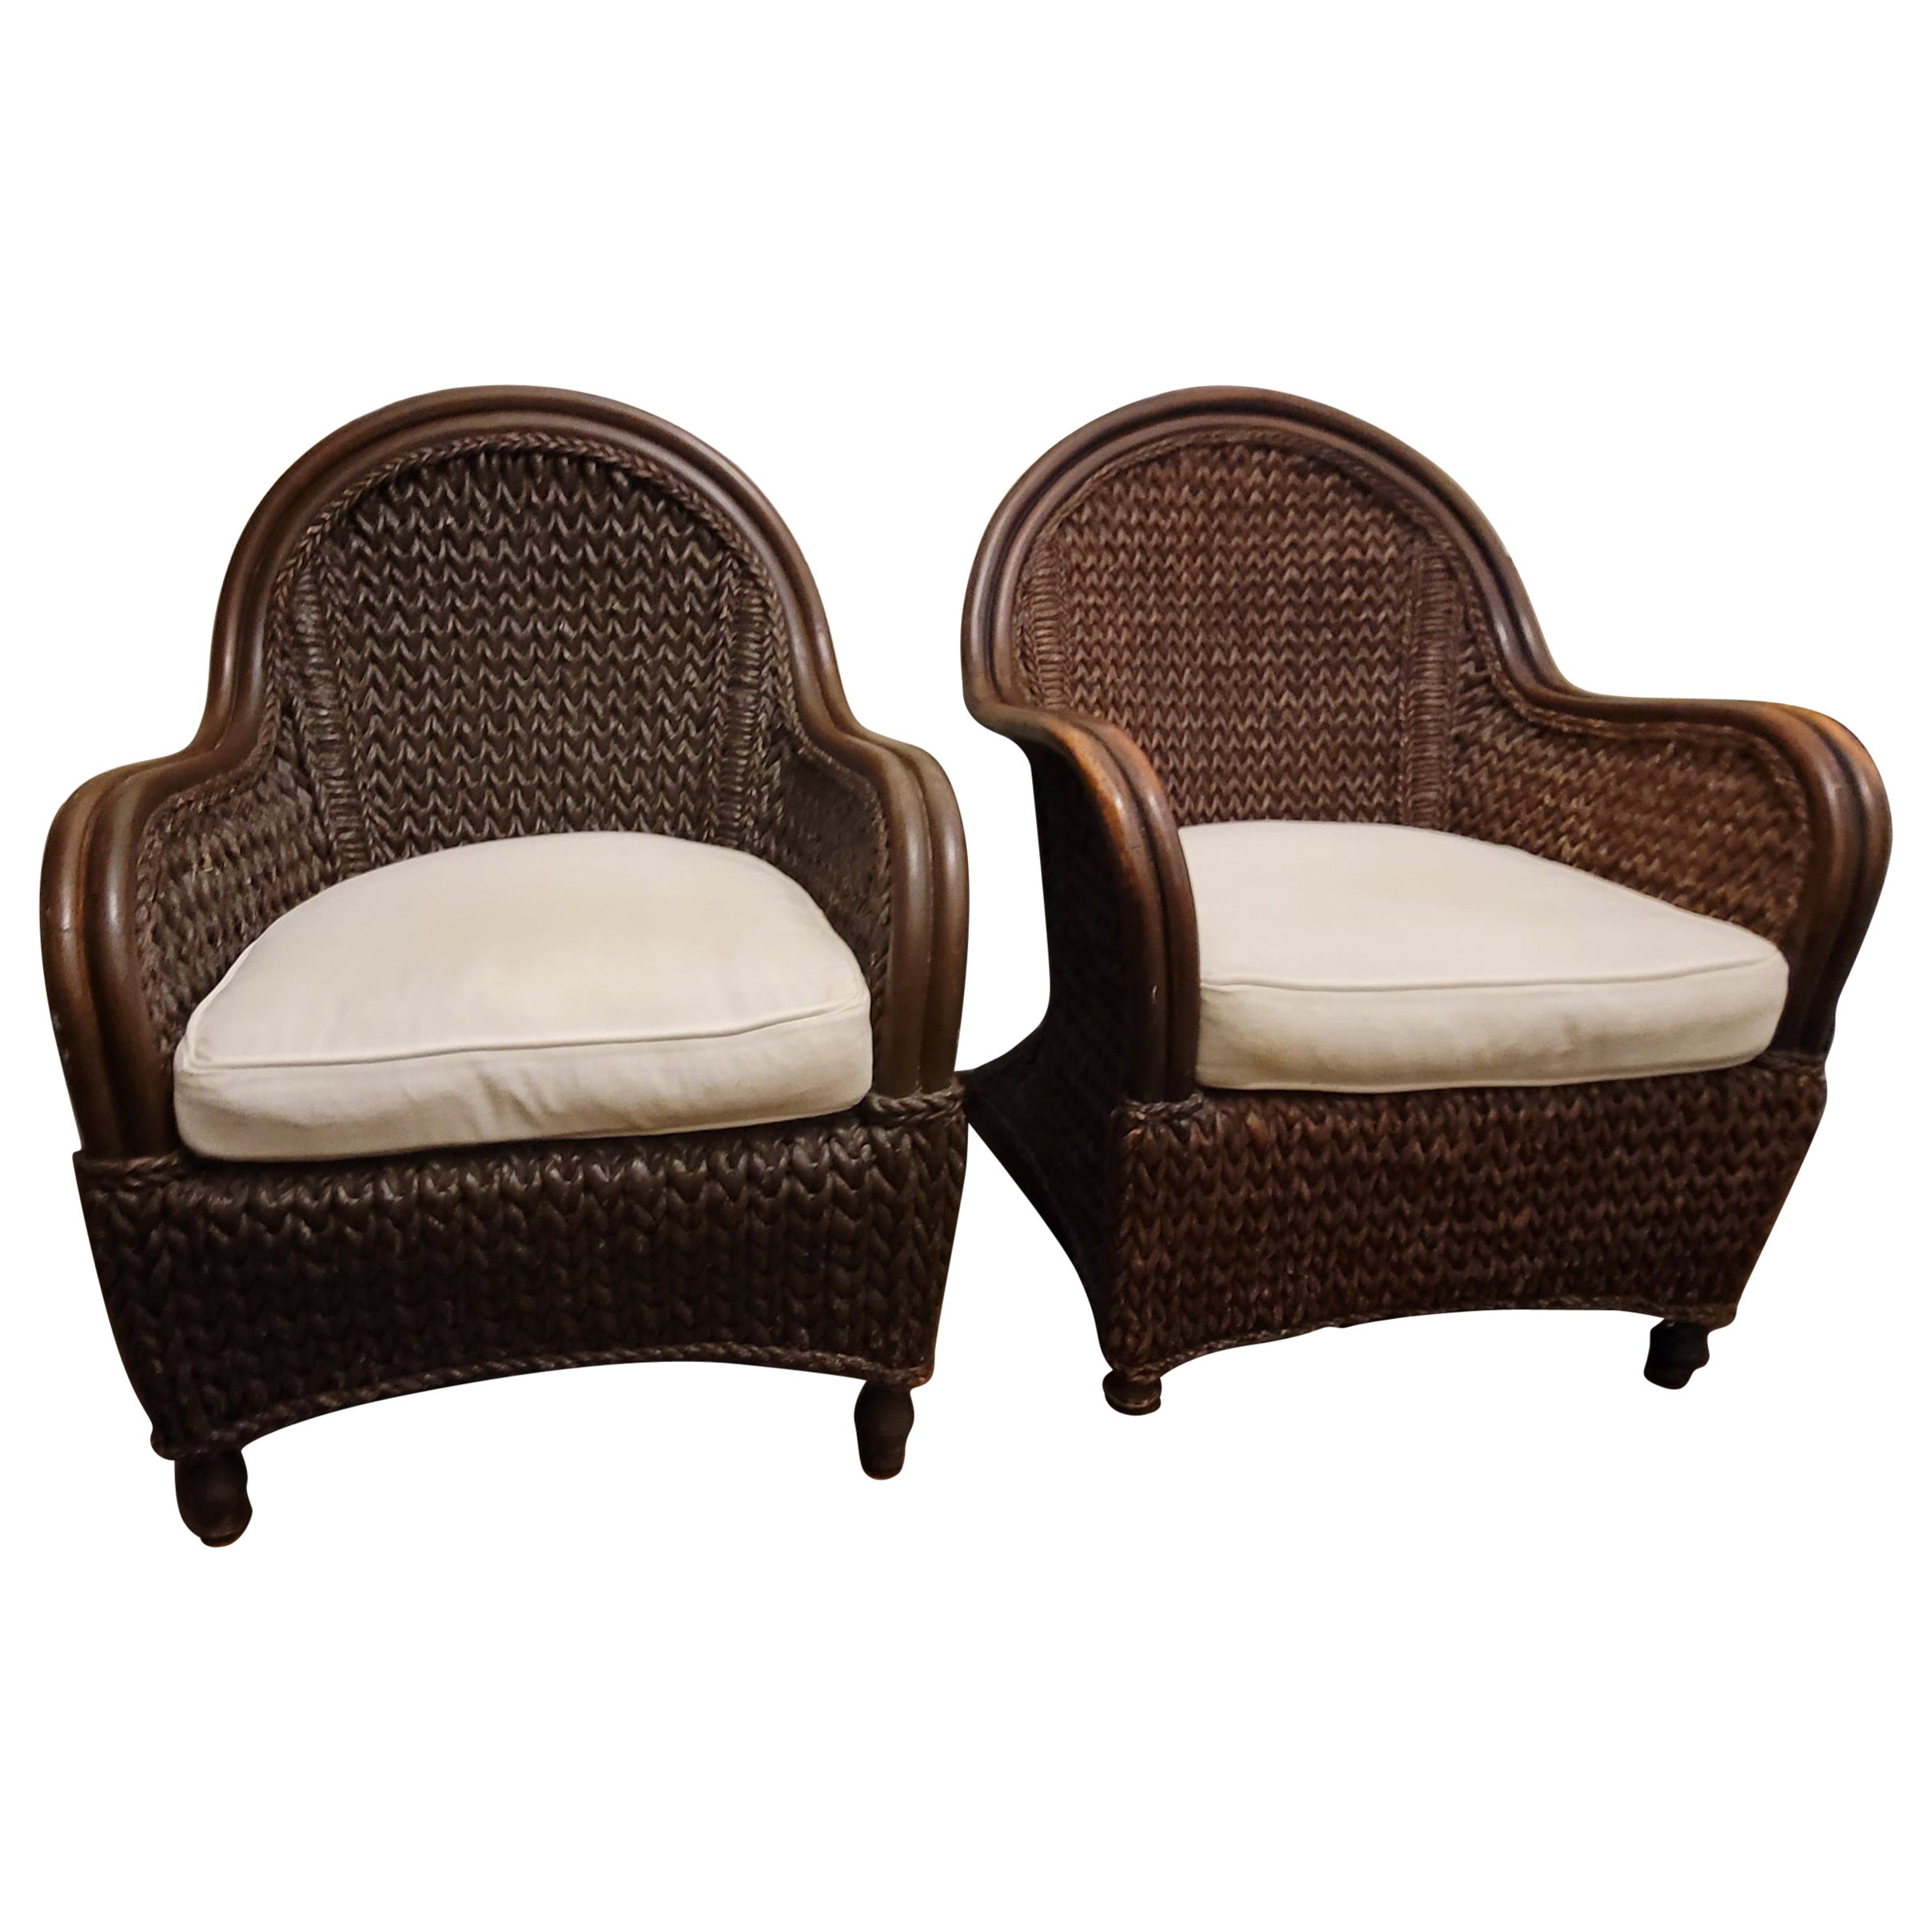 pier one wicker furniture discontinued